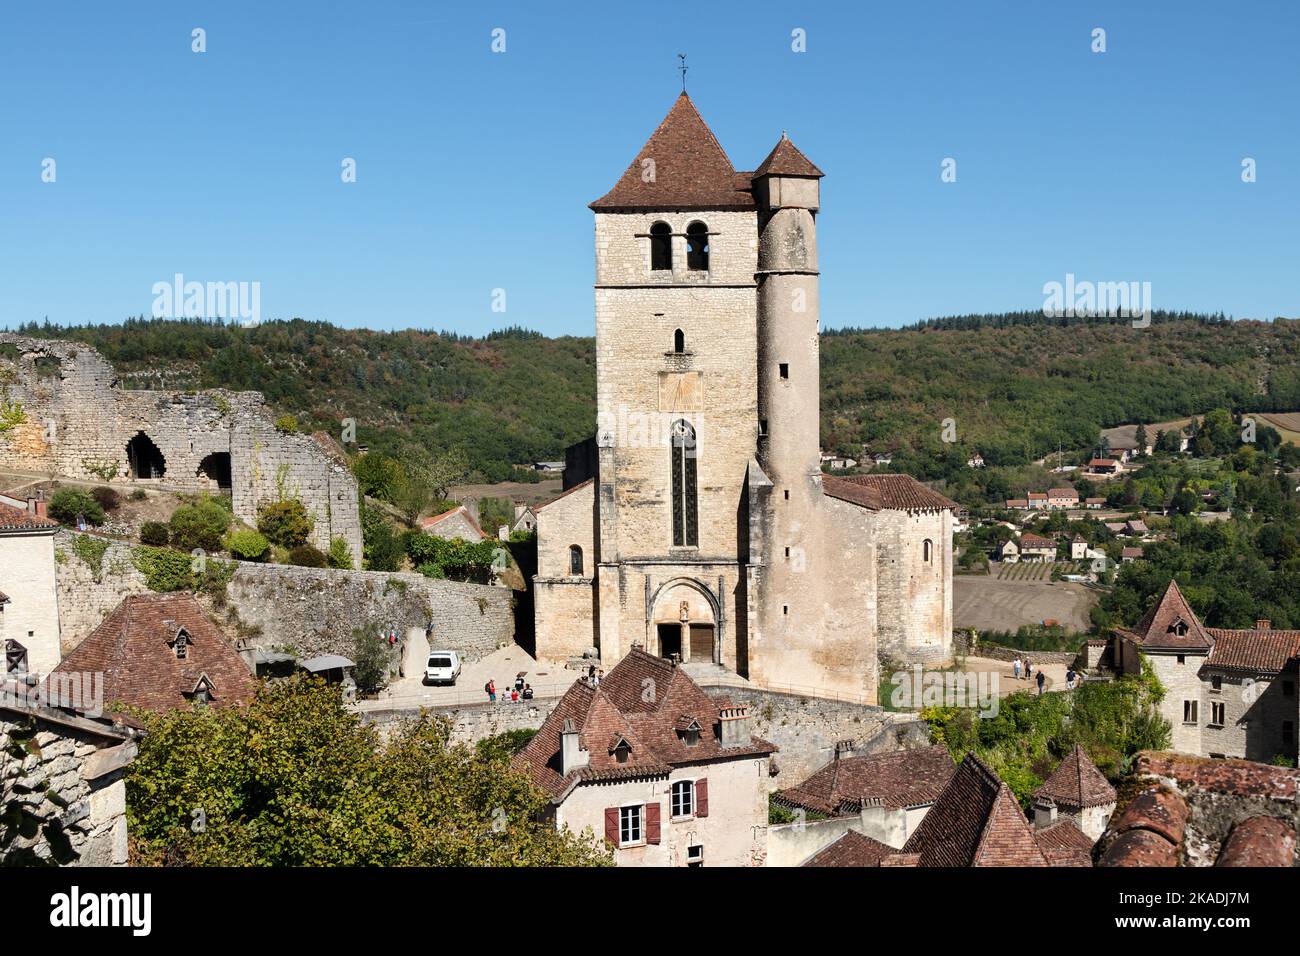 The Medieval Village of Saint-Cirq-Lapopie on the River Lot, Lot Department, France Stock Photo